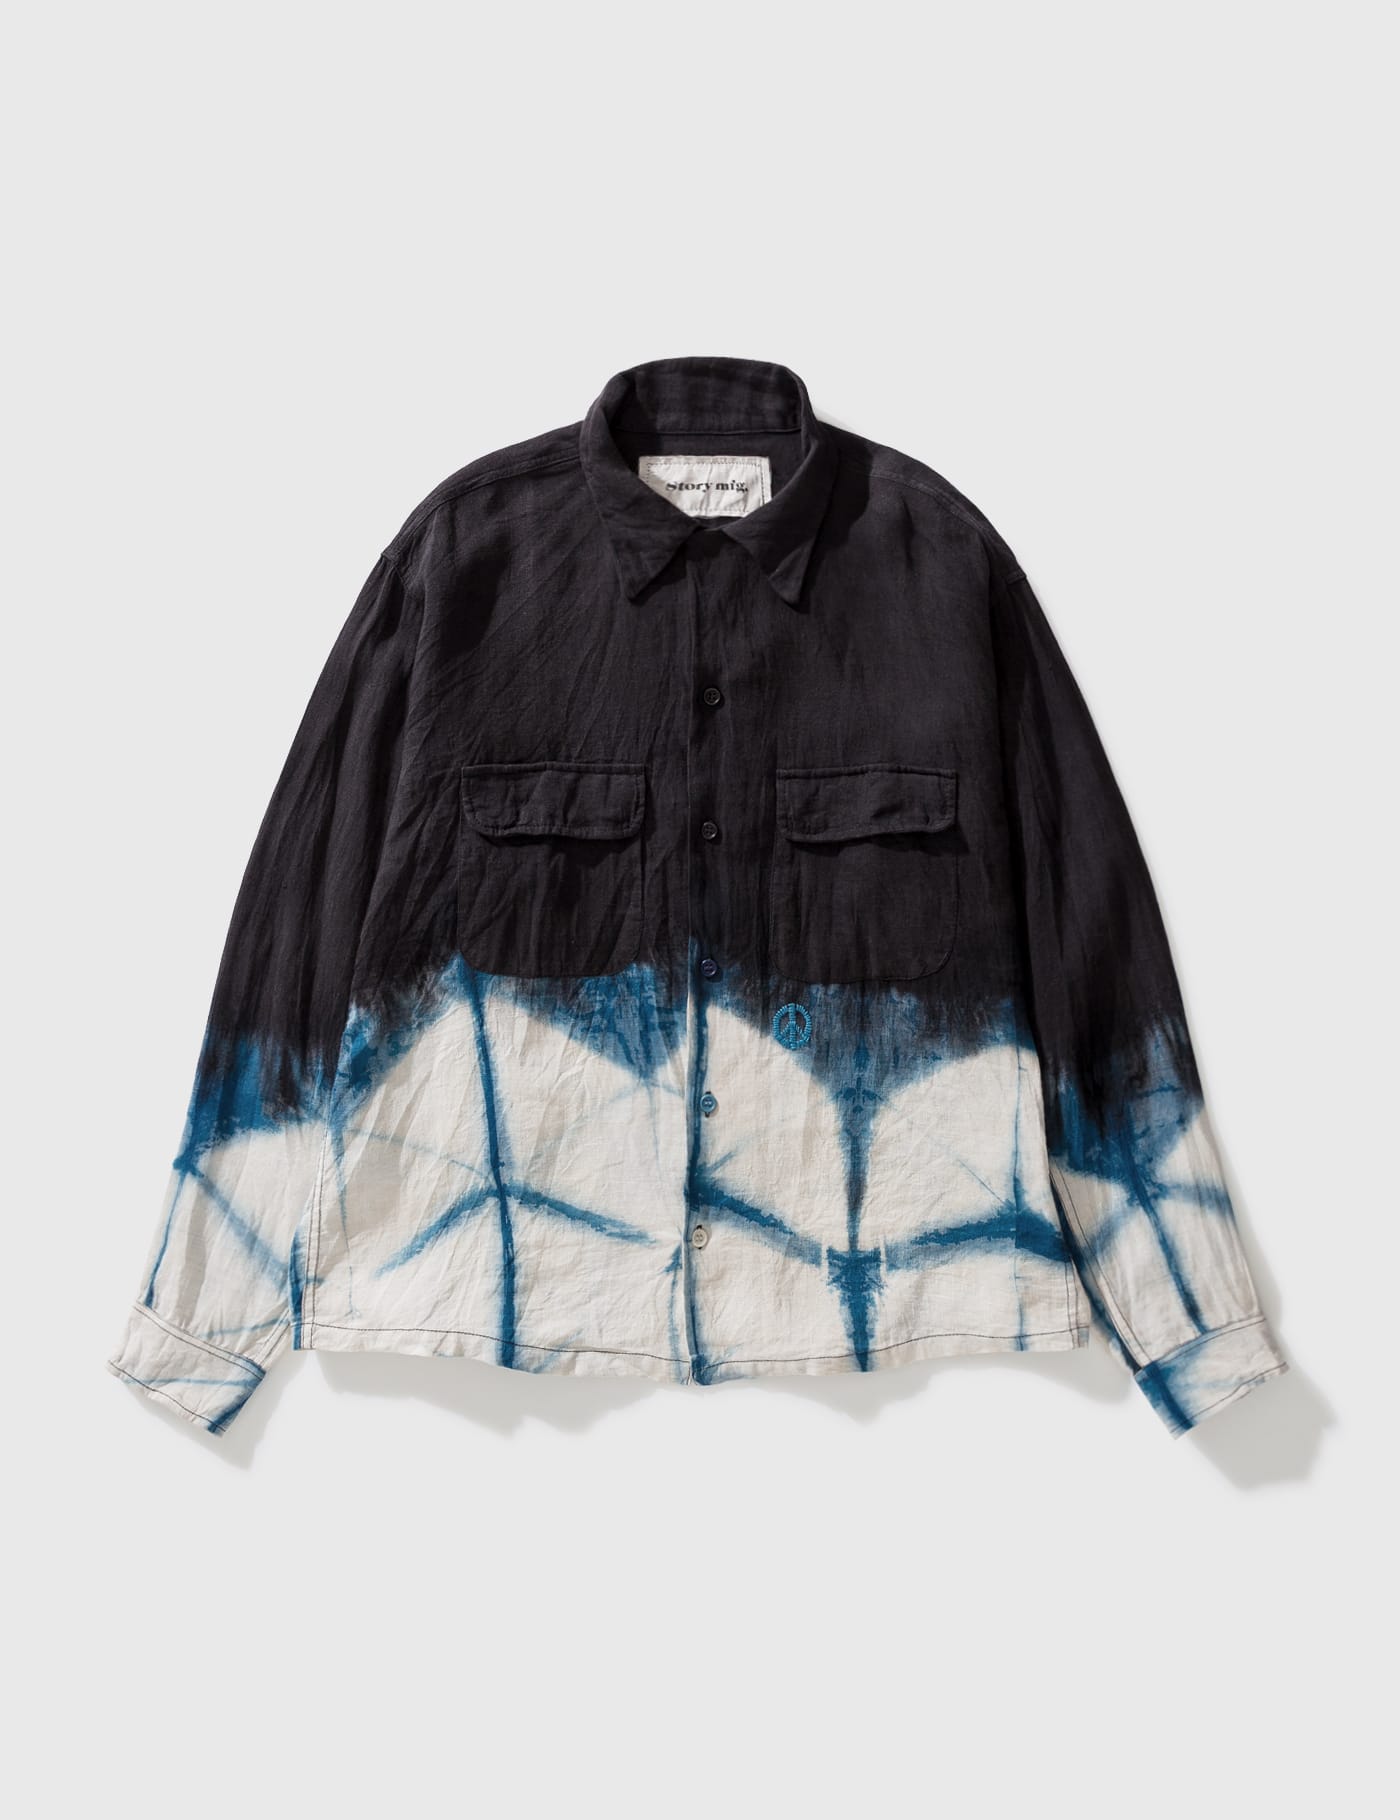 Story Mfg - Snack Shirt | HBX - Globally Curated Fashion and 